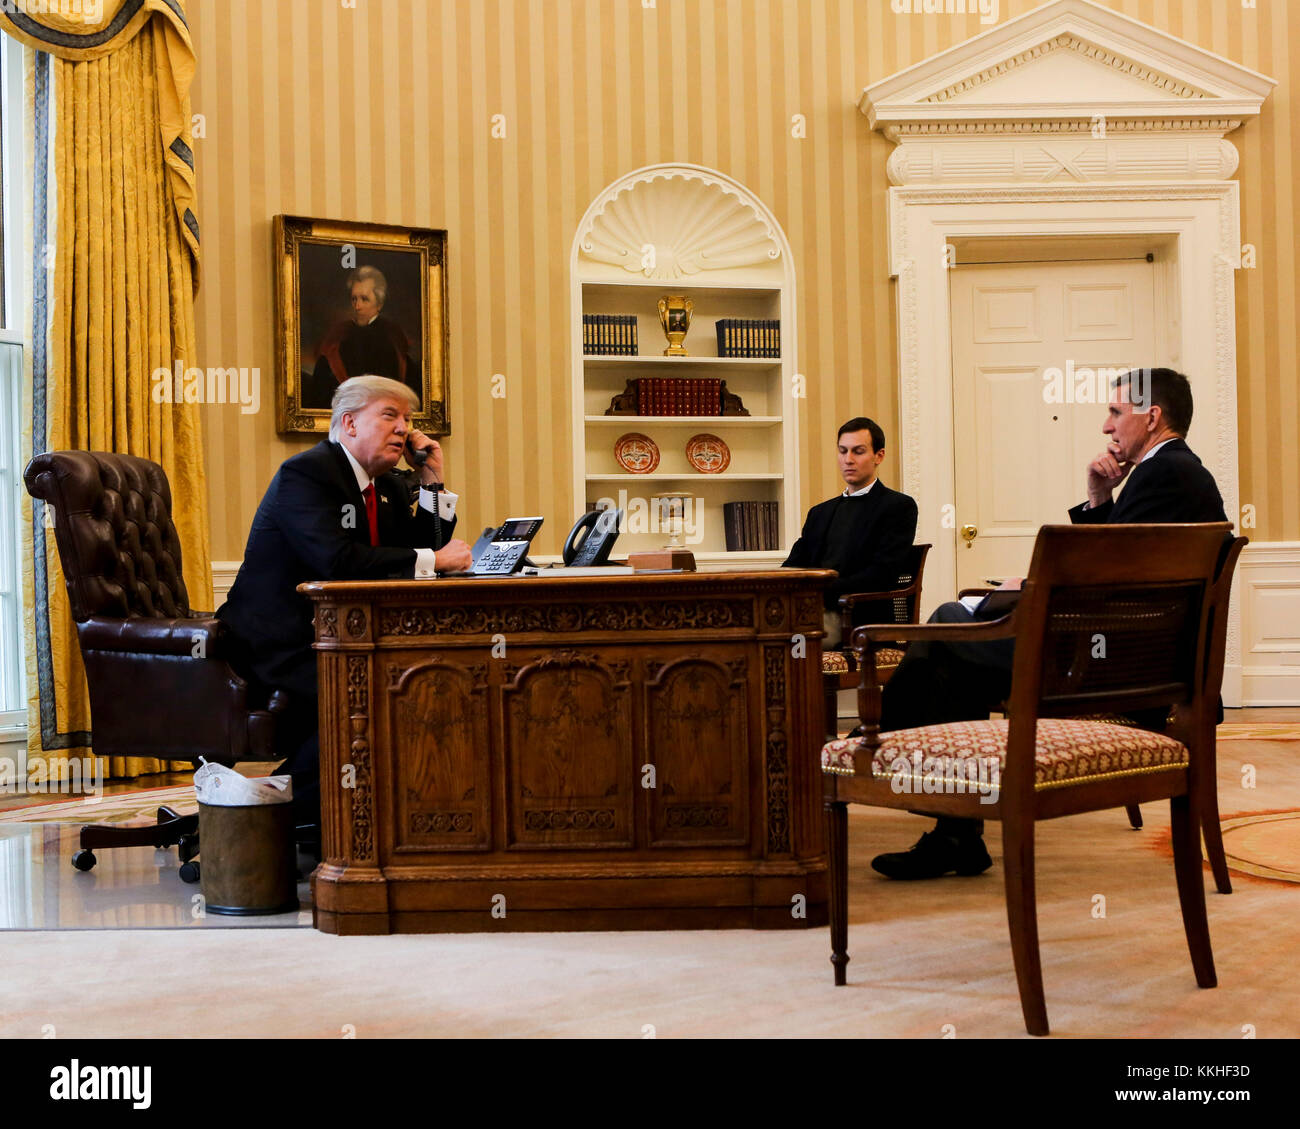 File. 1st Dec, 2017. Former U.S. National Security Adviser MICHAEL FLYNN pleaded guilty to lying to the Federal Bureau of Investigation regarding his improper contacts with Russia. PICTURED: January 29, 2017 - Washington, District of Columbia, US - US President Donald Trump speaks with the King of Saudi Arabia, Salman bin Abd al-Aziz Al Saud in the Oval Office of the White House surrounded by Senior Adviser to the President Jared Kushner (C), and Security Advisor Michael Flynn (R), January 29, 2017, Washington, DC Credit: Aude Guerrucci/CNP/ZUMA Wire/ZUMAPRESS.com/Alamy Live News Stock Photo